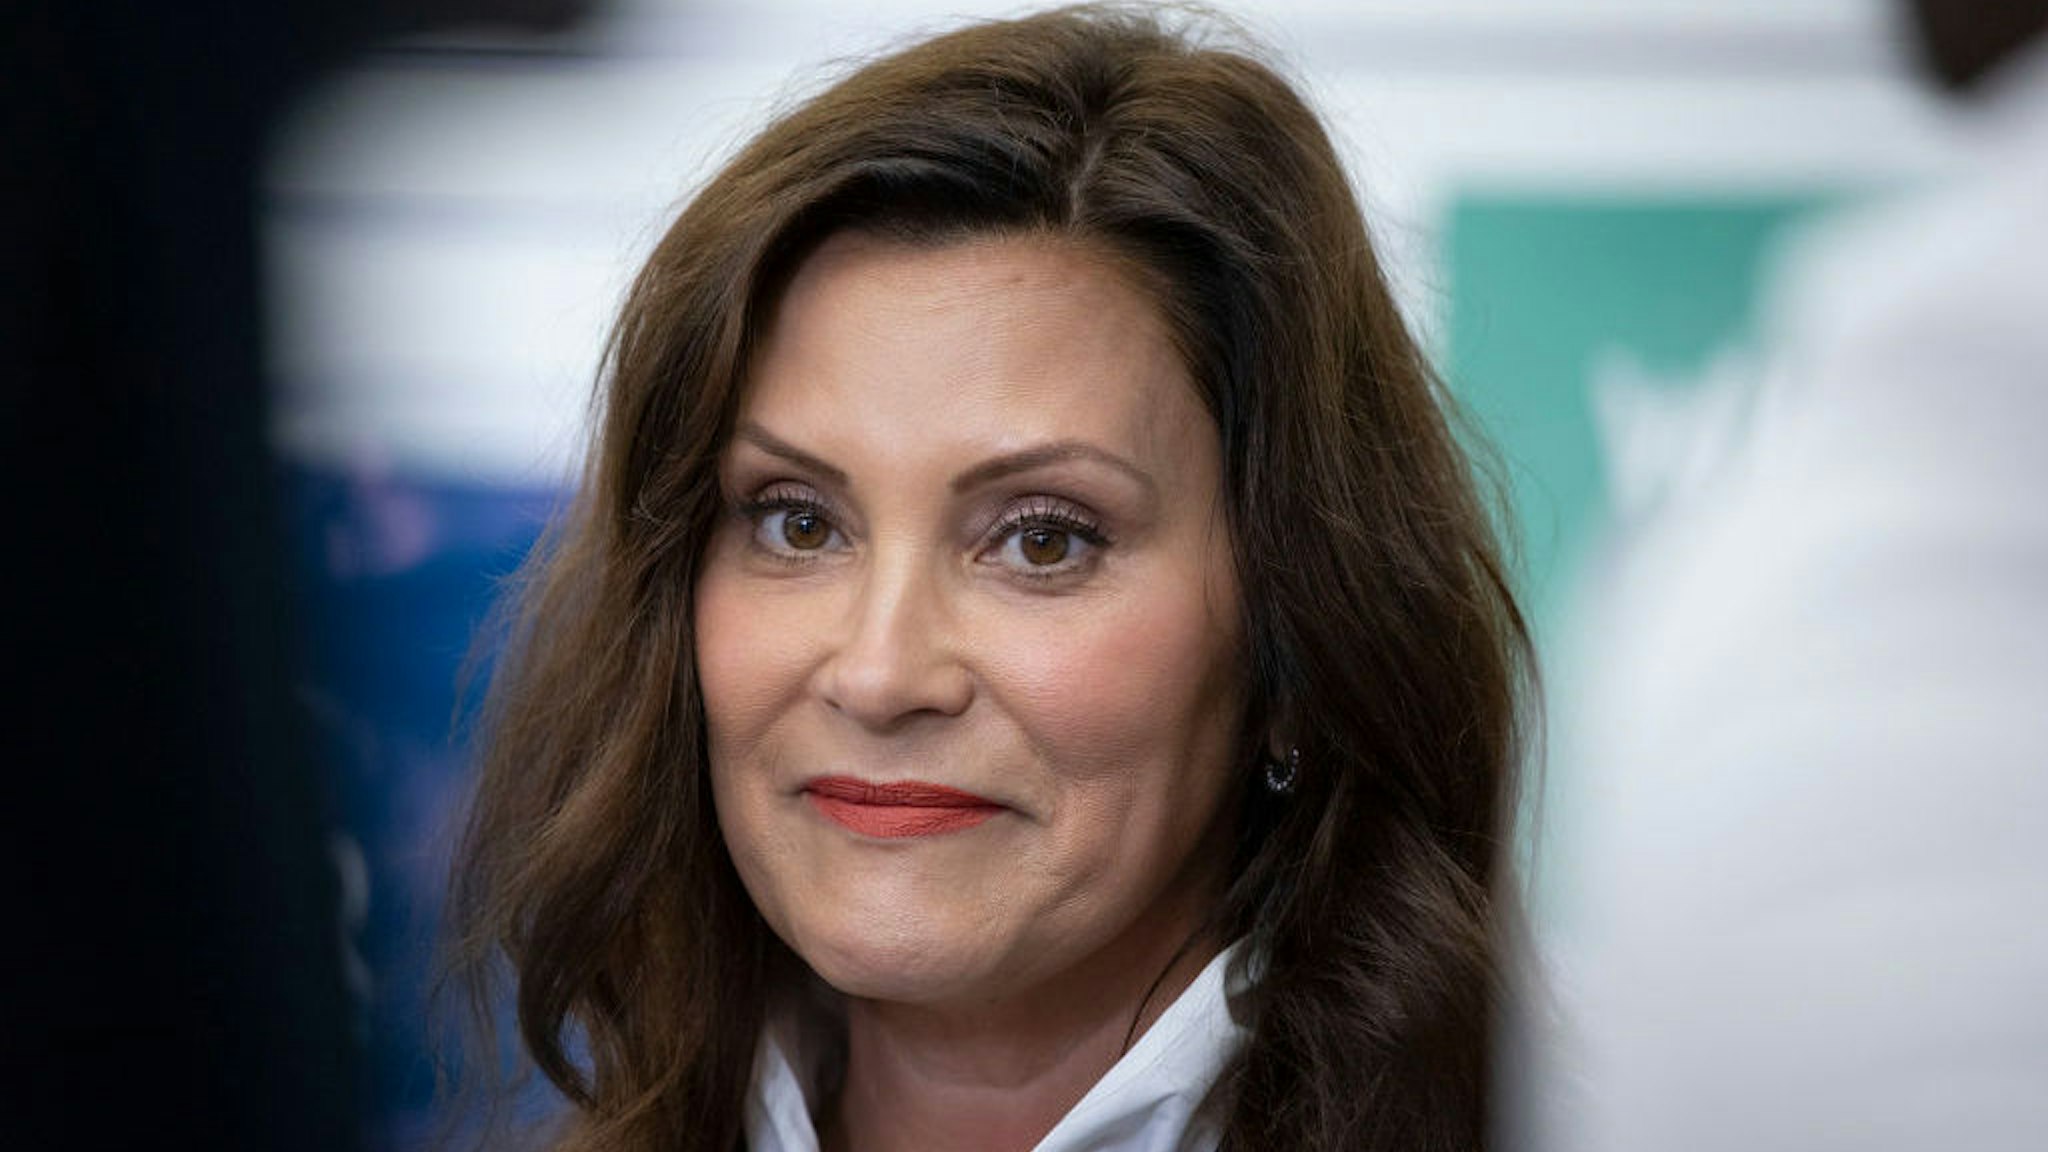 GRAND RAPIDS, MI - AUGUST 02: Michigan Governor Gretchen Whitmer meets with volunteers for canvass kickoffs on Michigan Primary Election Day on August 2, 2022 in Grand Rapids, Michigan. Today’s Midterm Primary Election will determine which one of five Michigan republican gubernatorial candidates will run against Governor Whitmer, a democrat, in the upcoming November Midterm General Election. Photo by Bill Pugliano/Getty Images)